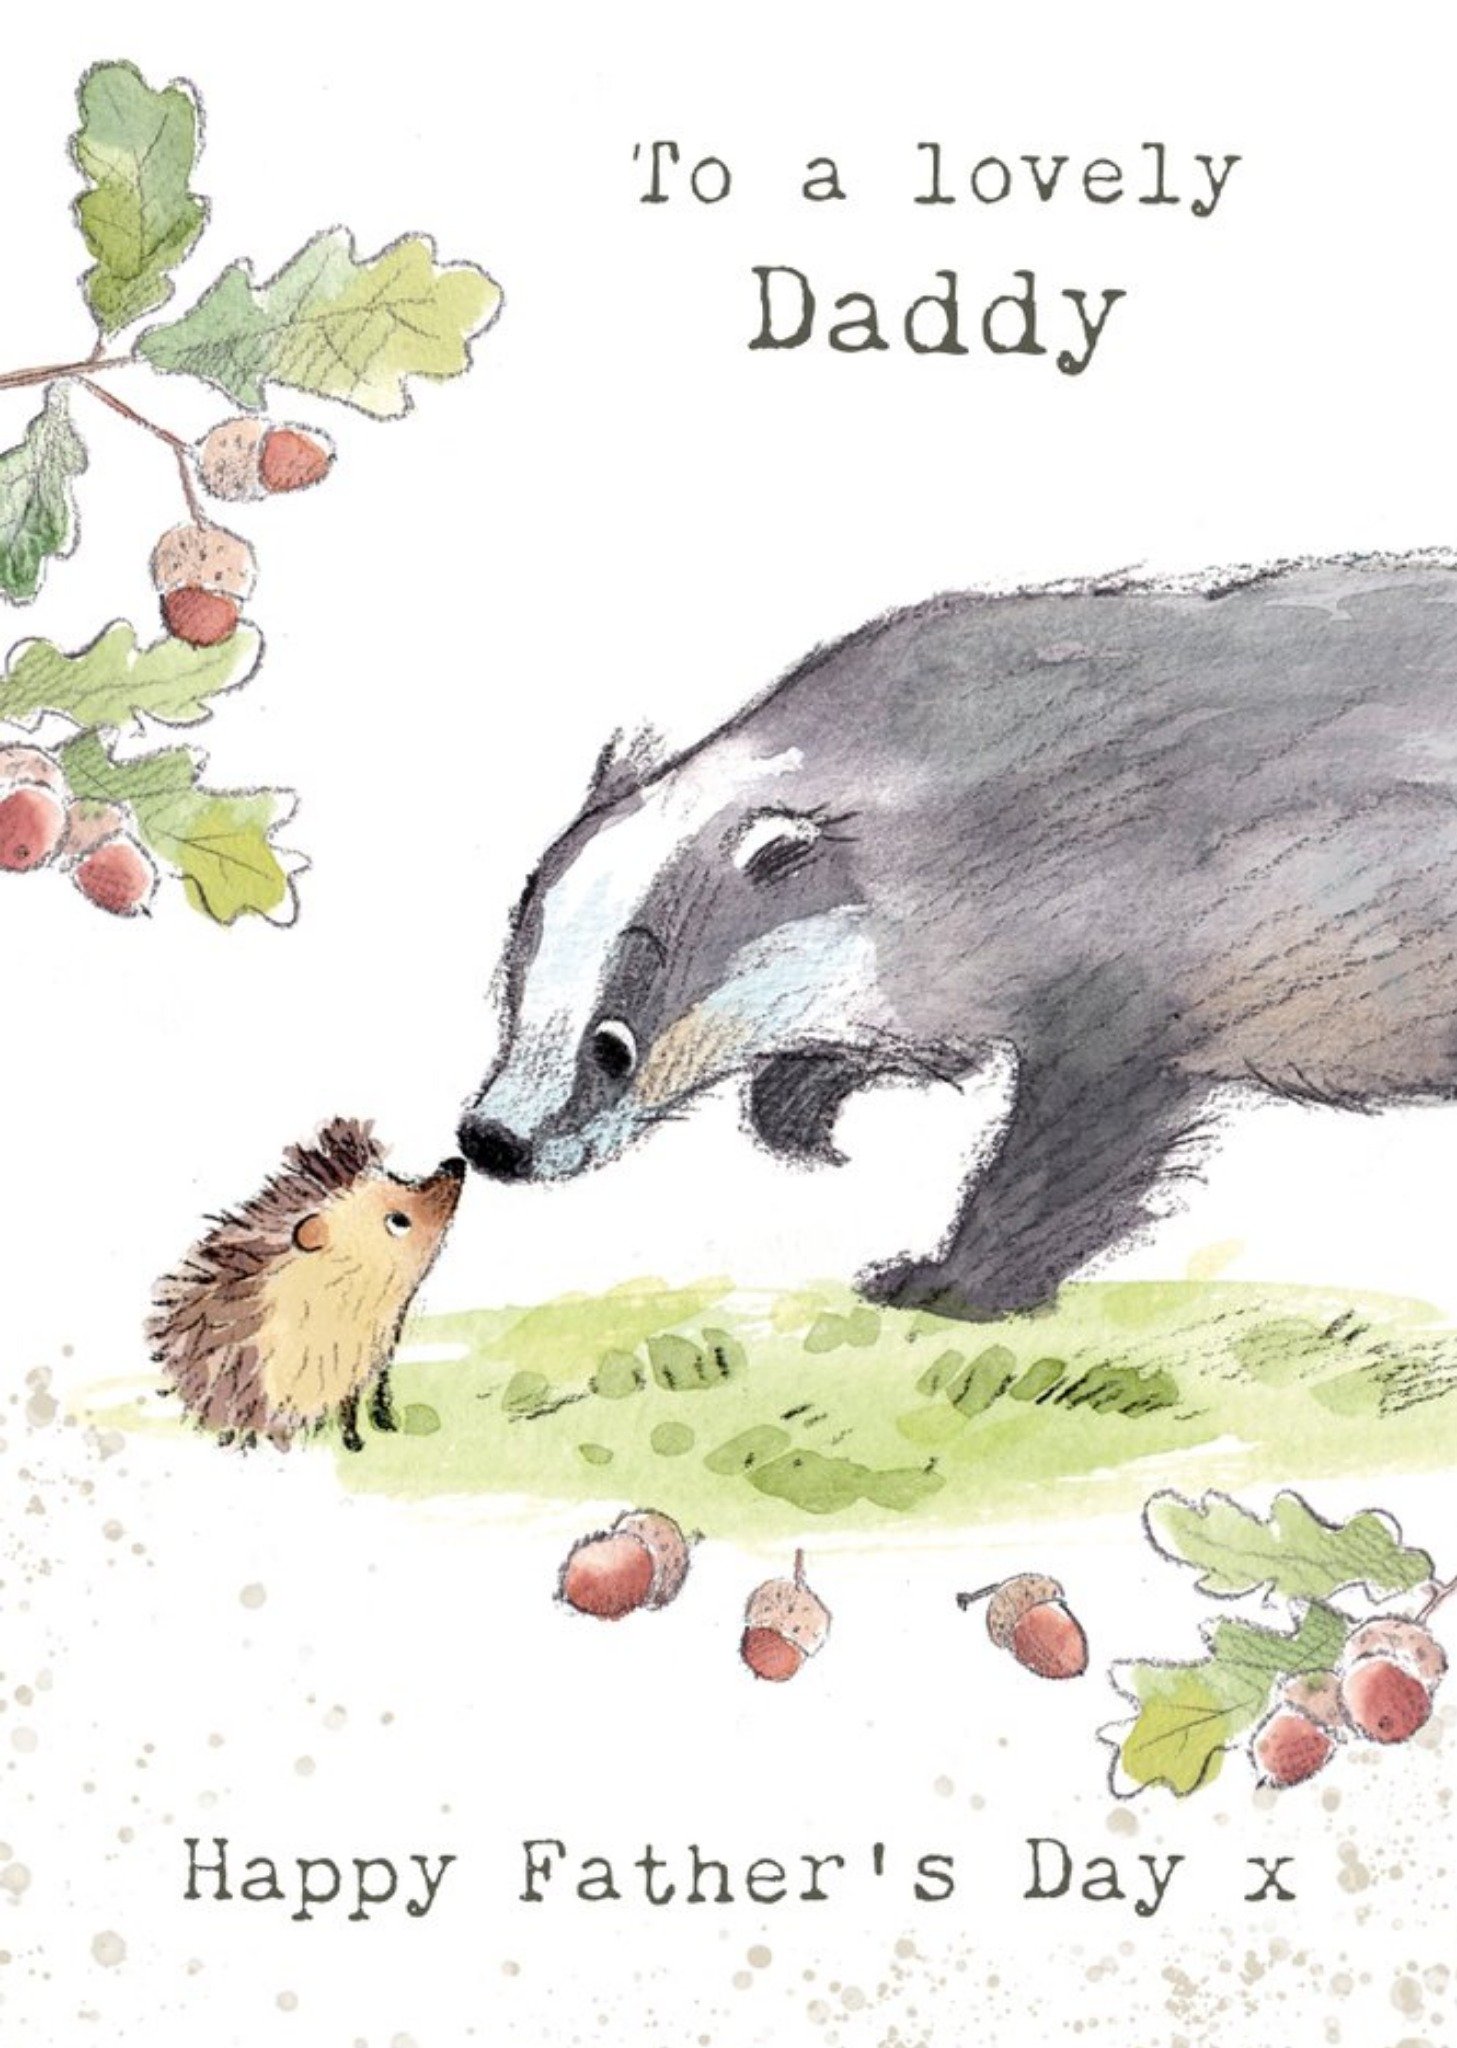 Moonpig Illustration Of A Badger And A Hedgehog Father's Day Card Ecard